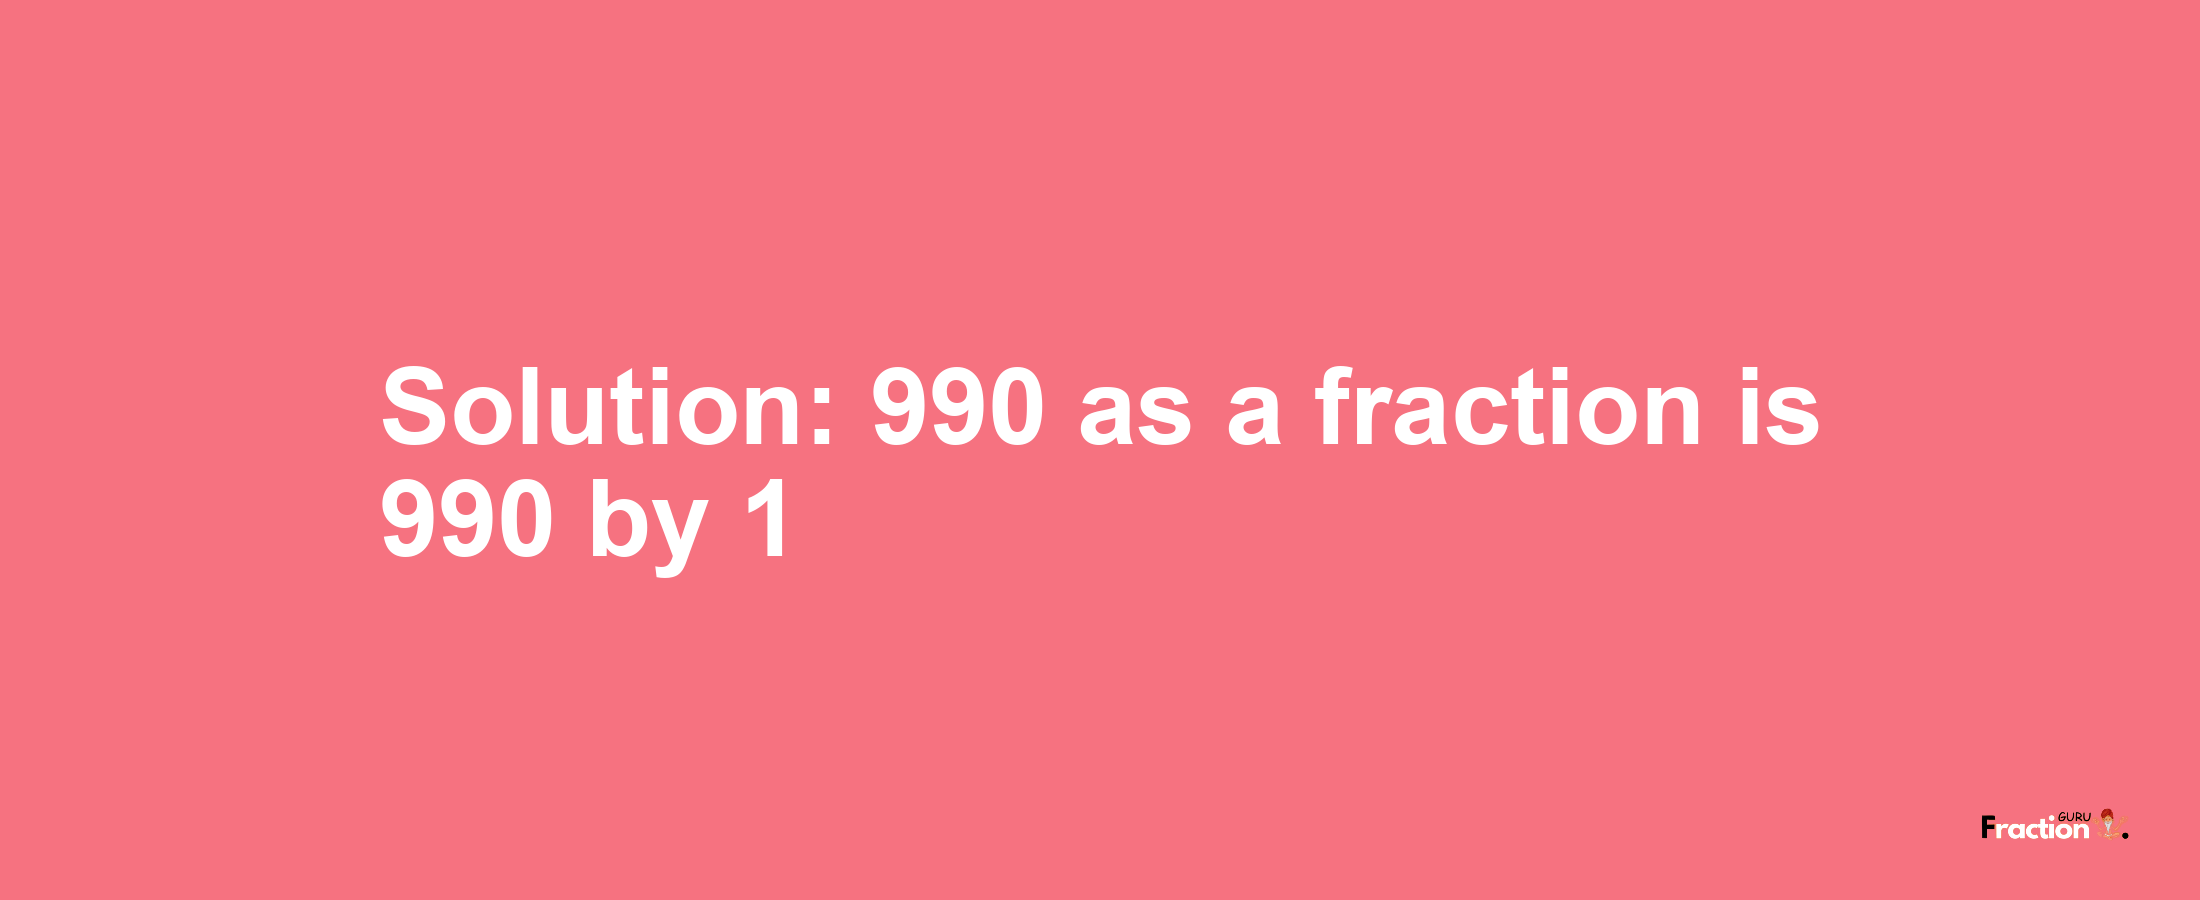 Solution:990 as a fraction is 990/1